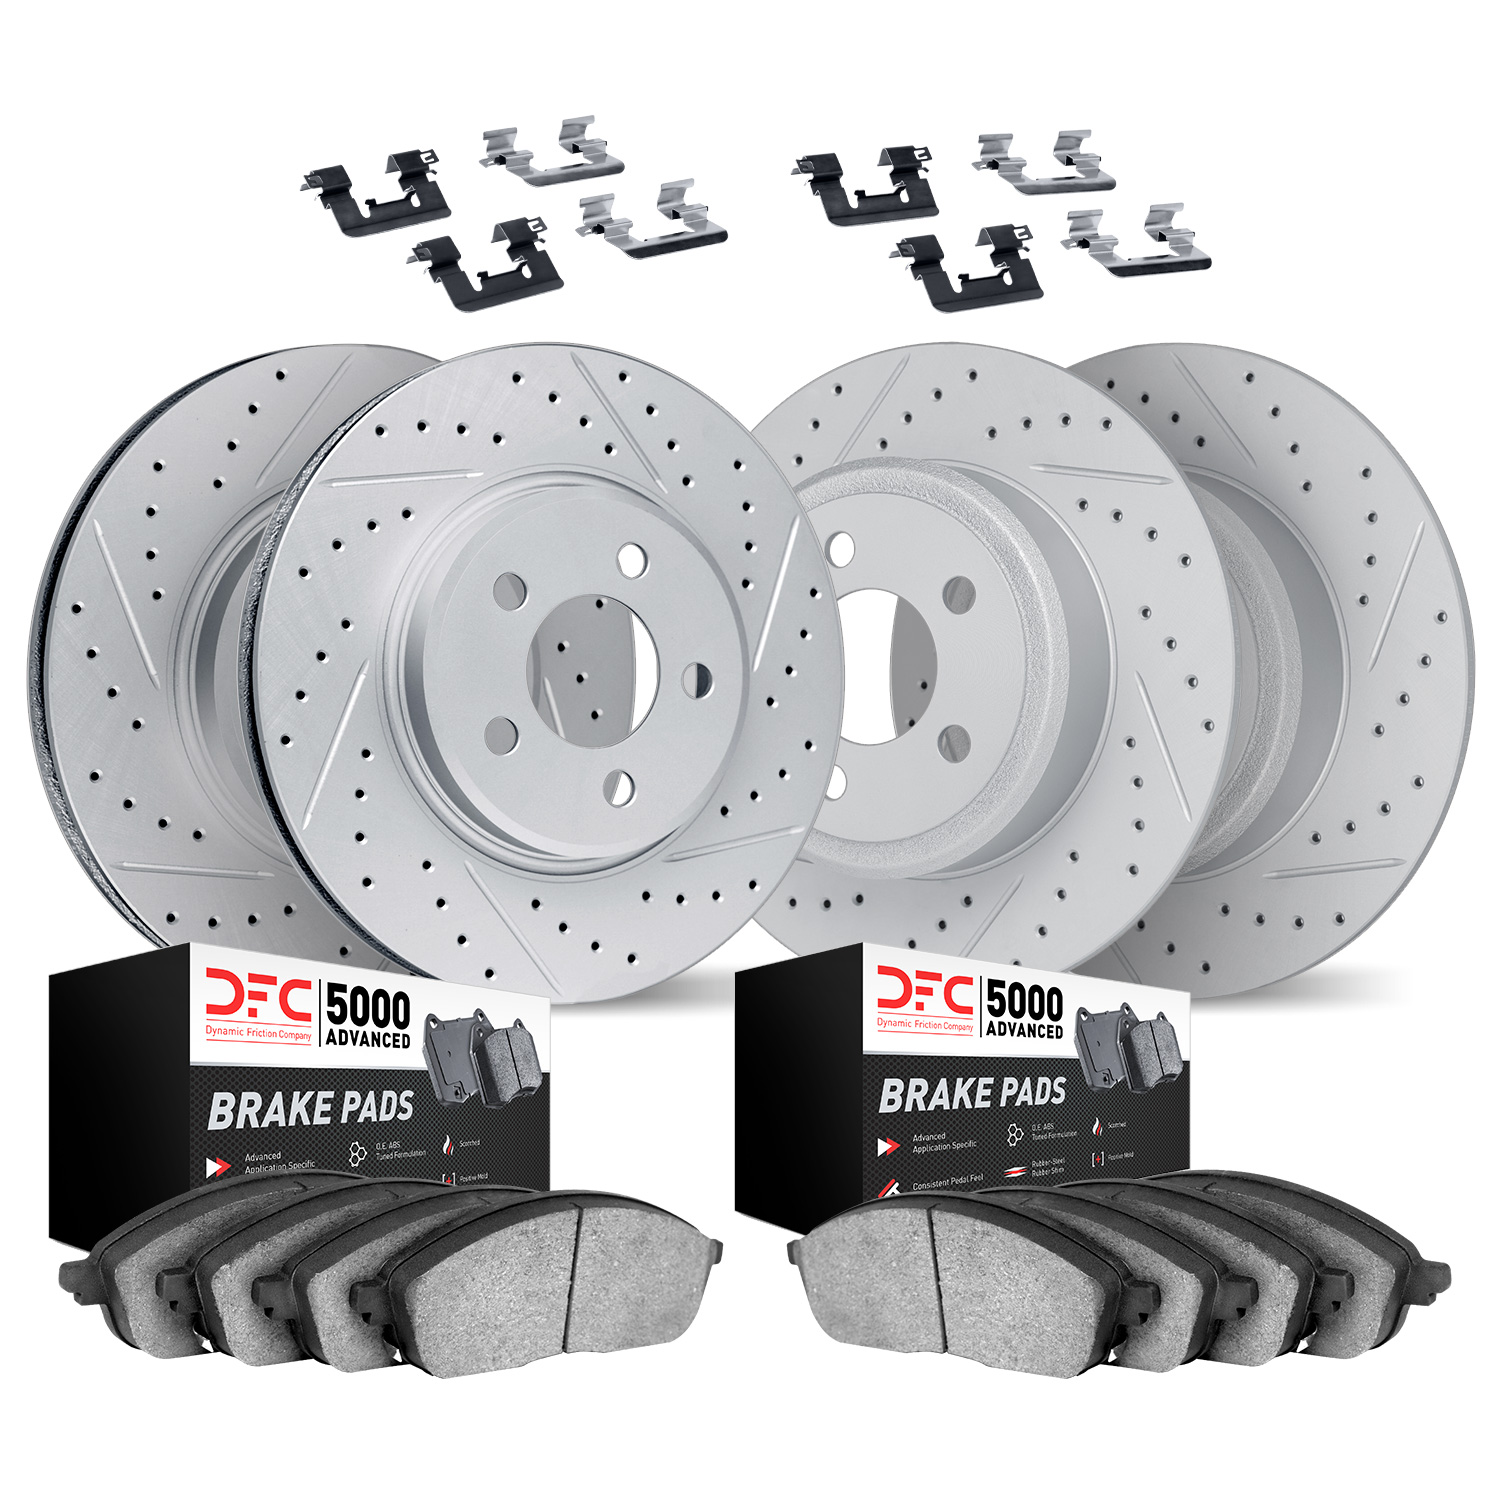 2514-42071 Geoperformance Drilled/Slotted Rotors w/5000 Advanced Brake Pads Kit & Hardware, Fits Select Mopar, Position: Front a